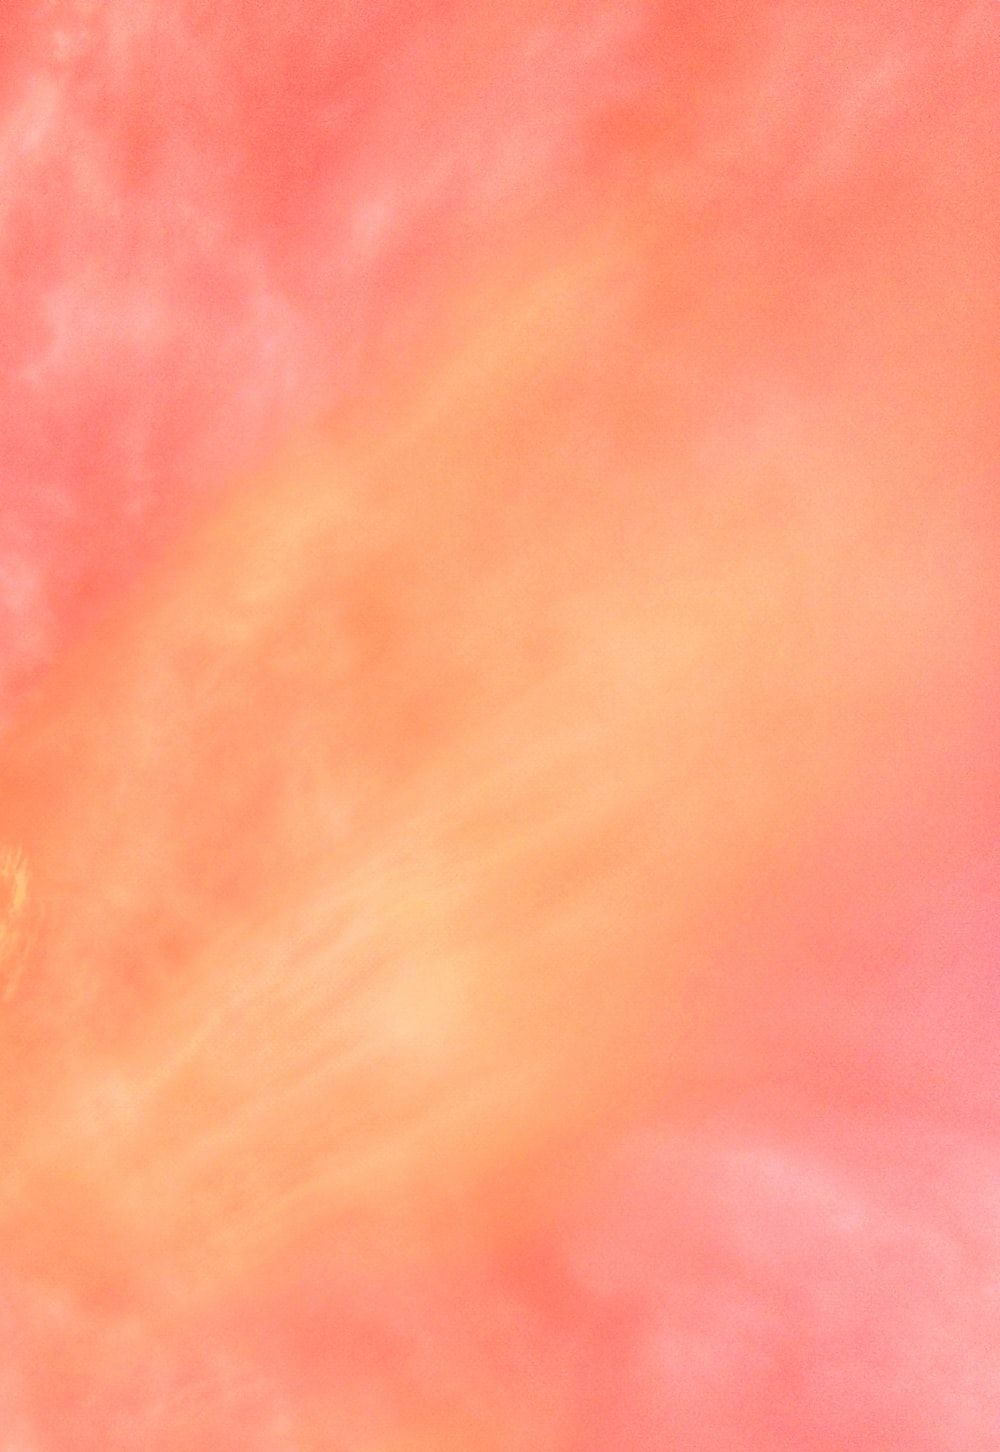 A photo of a pink and orange sky - Coral